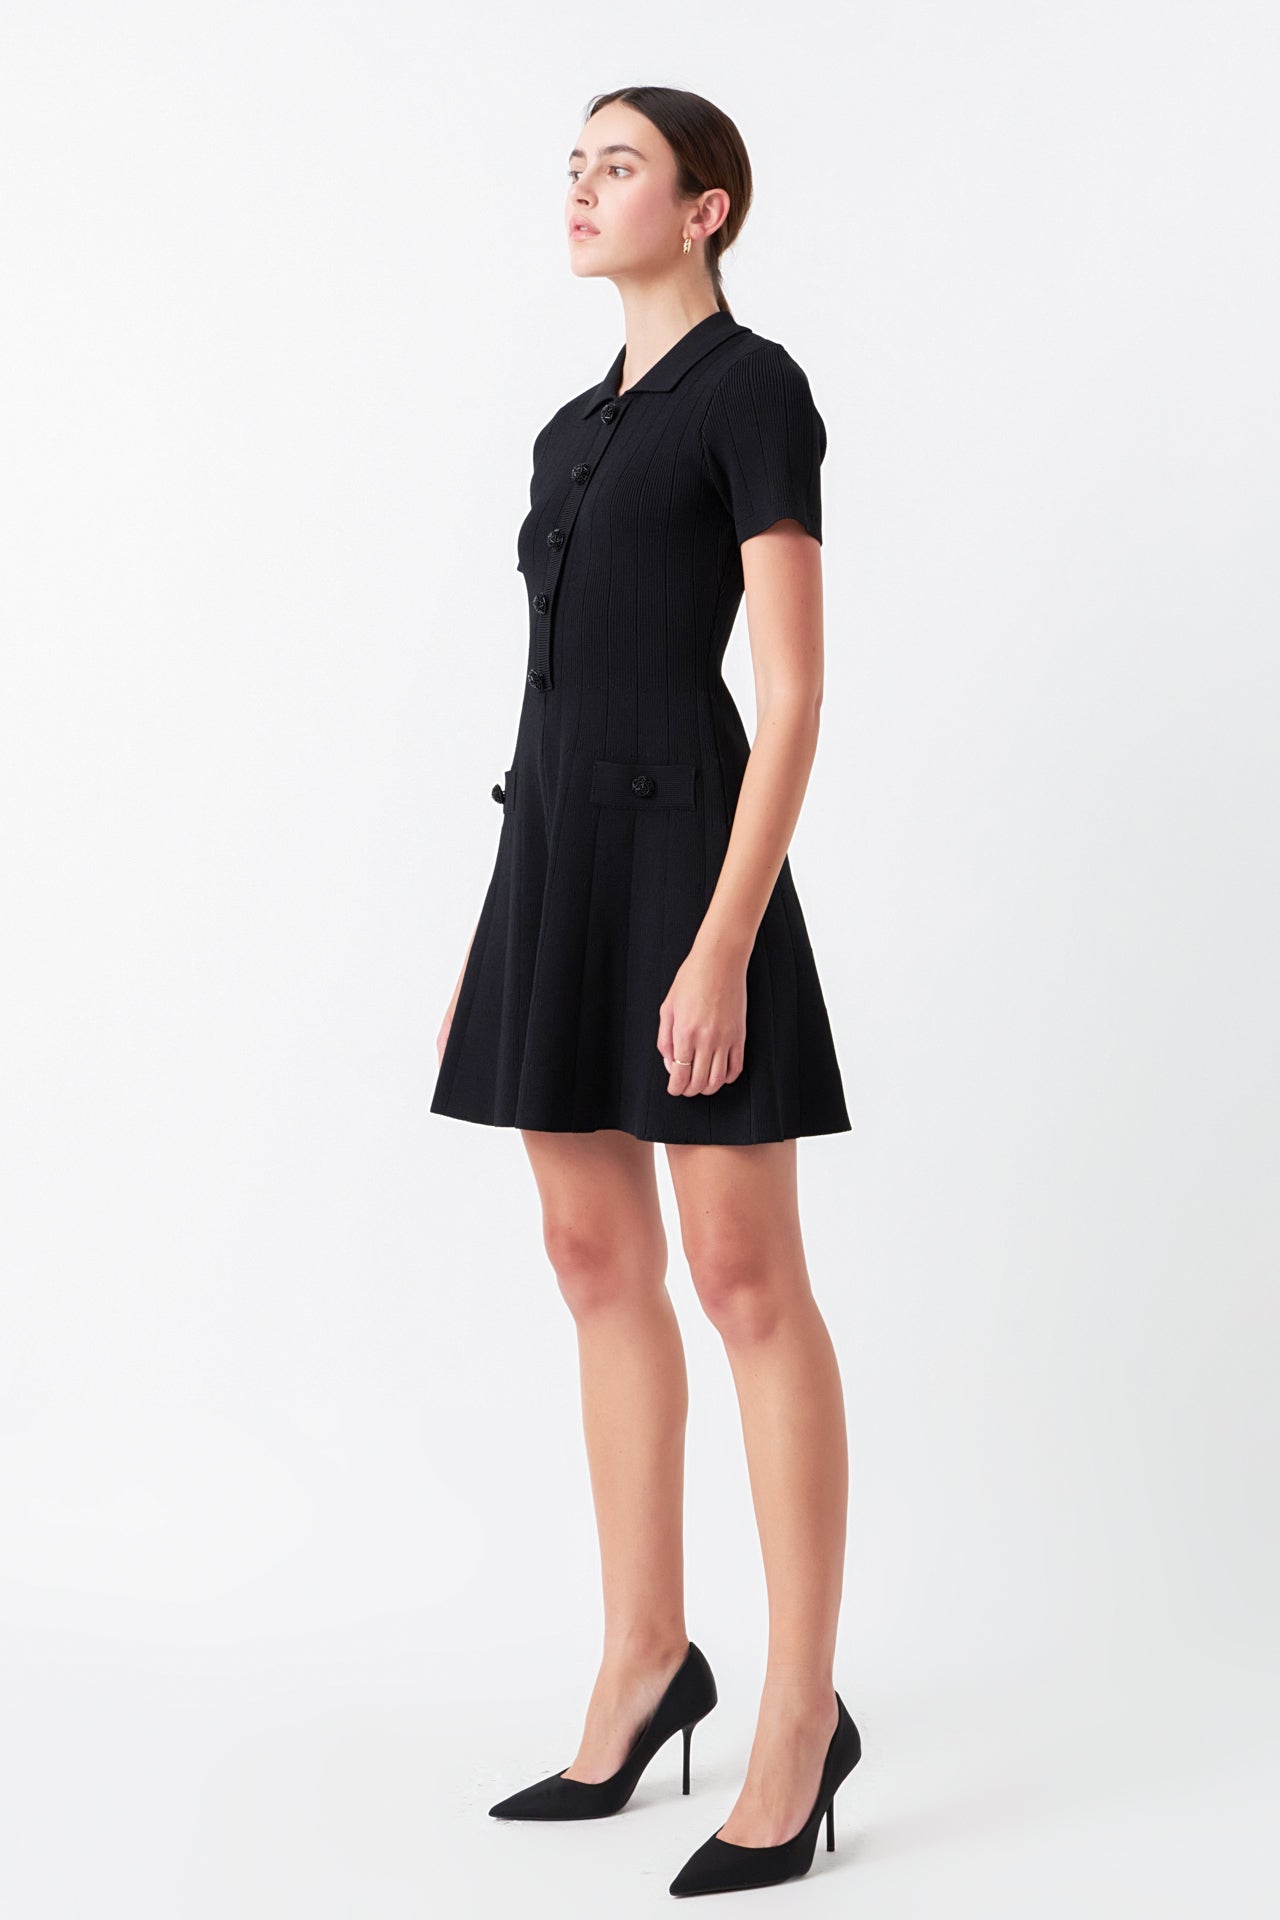 ENDLESS ROSE - Jewel Buttoned Knit Mini Dress - DRESSES available at Objectrare